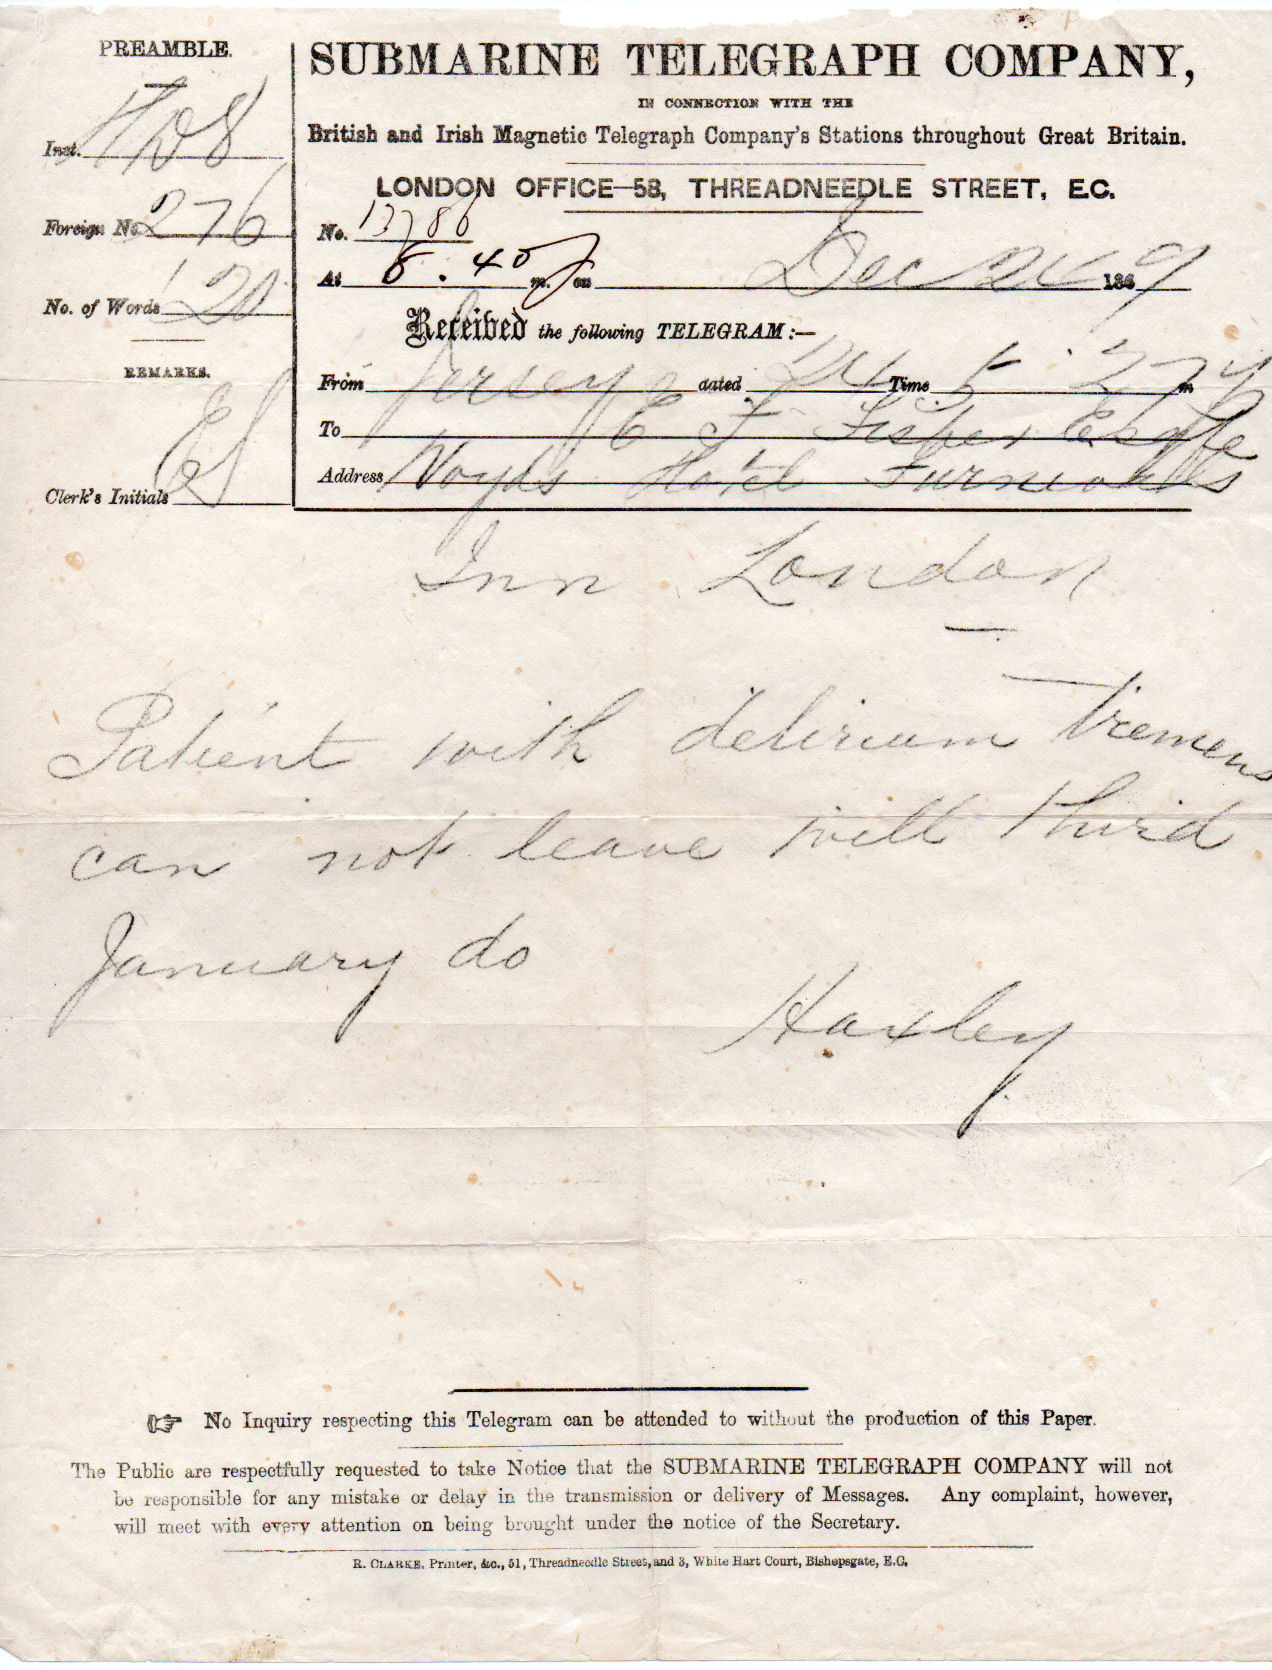 Submarine Telegraph Co. 1869 form - front